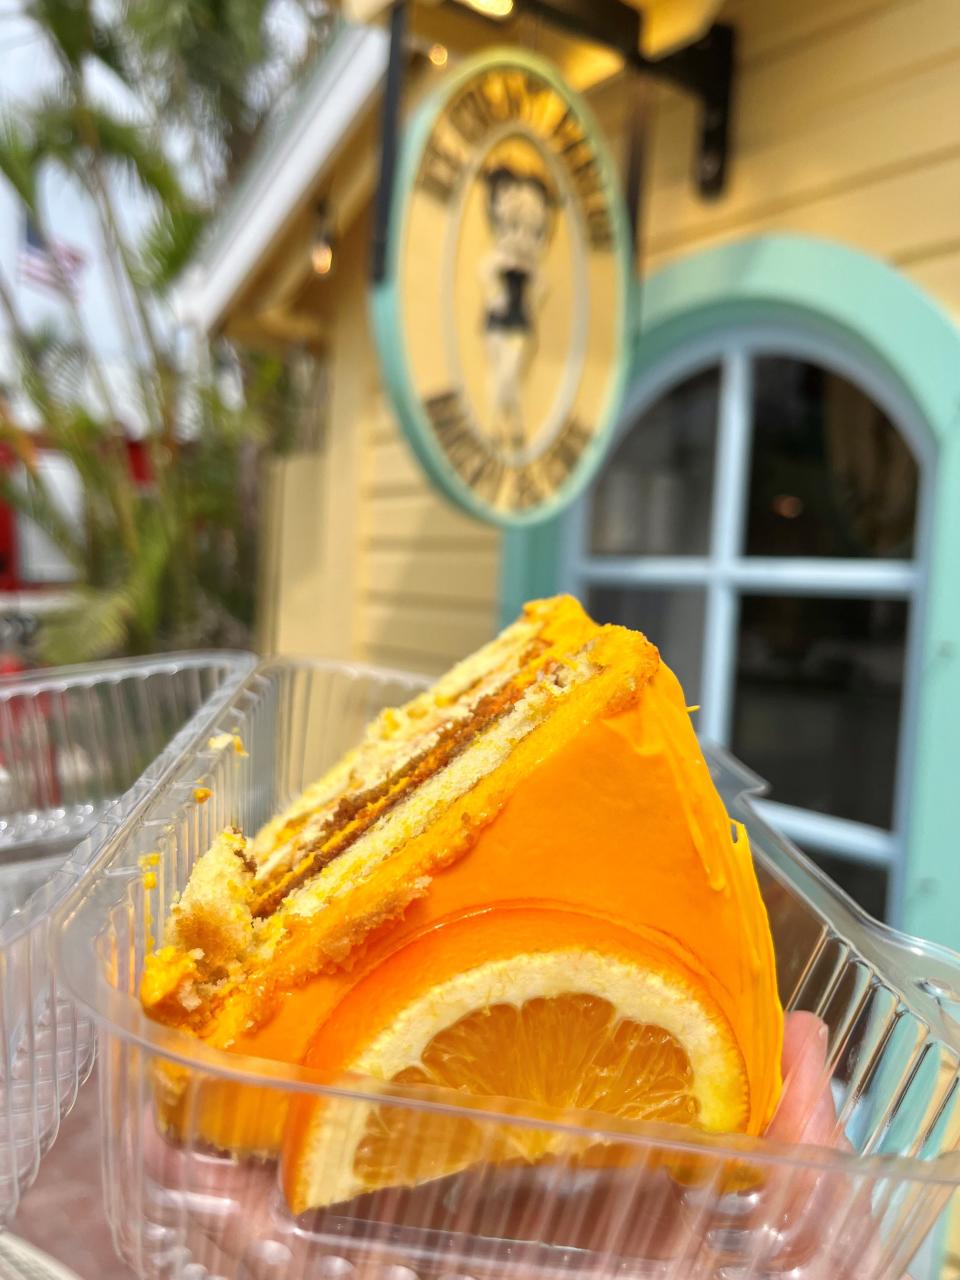 The orange crush cake is a best-seller at Boops By The Bubble Room on Captiva.